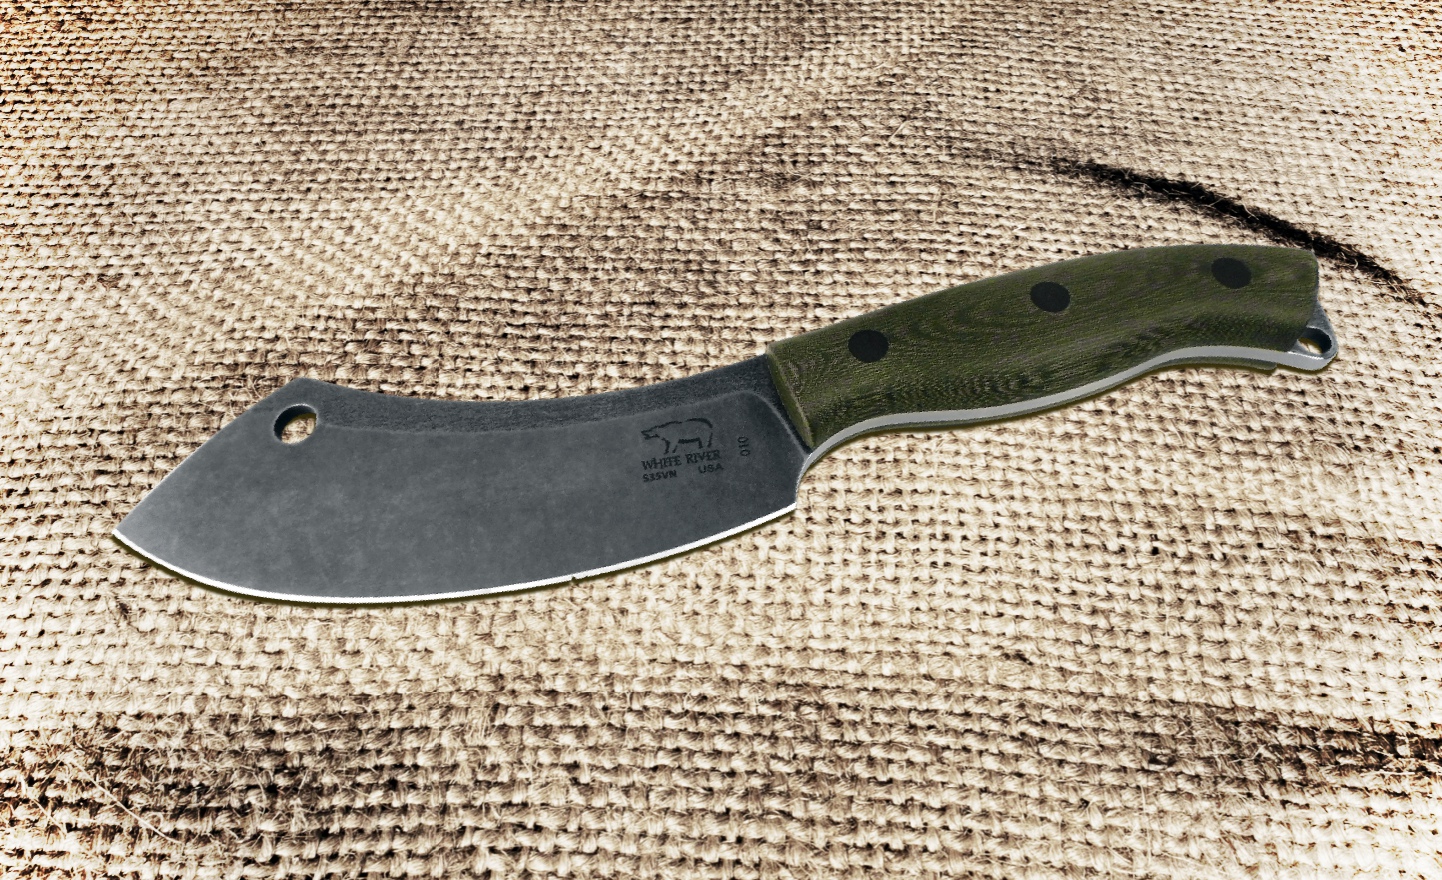 https://knifenews.com/wp-content/uploads/2018/01/white-river-clever-cleaver-feature.jpg